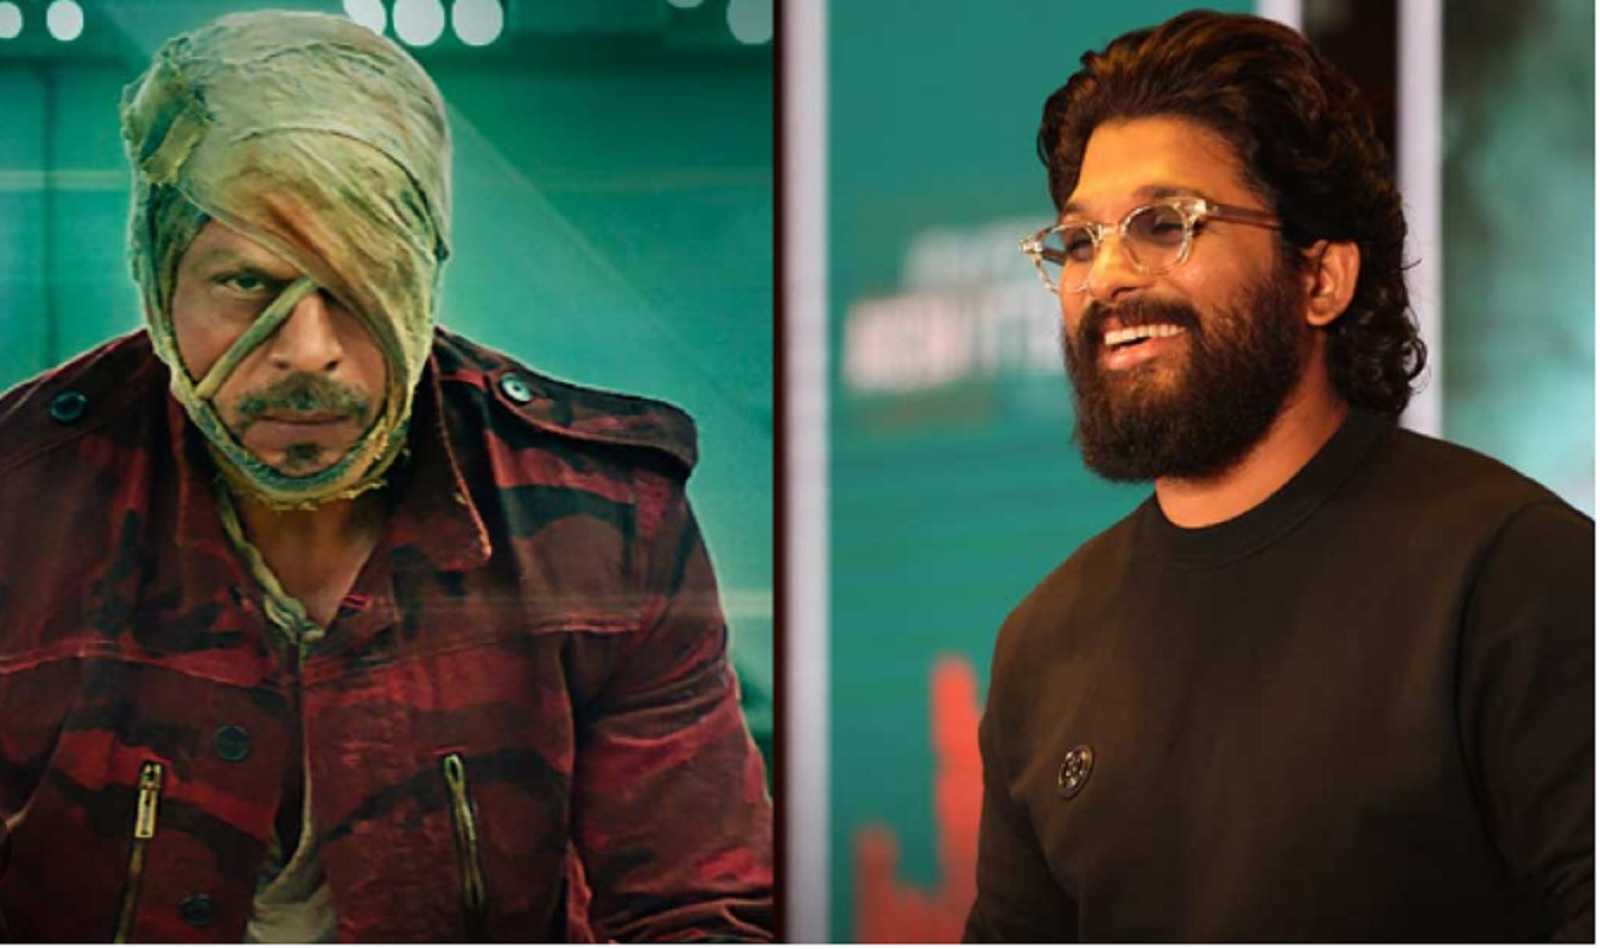 Has Allu Arjun decided to skip Shah Rukh Khan starrer Jawan for Pushpa 2? Here's what we know